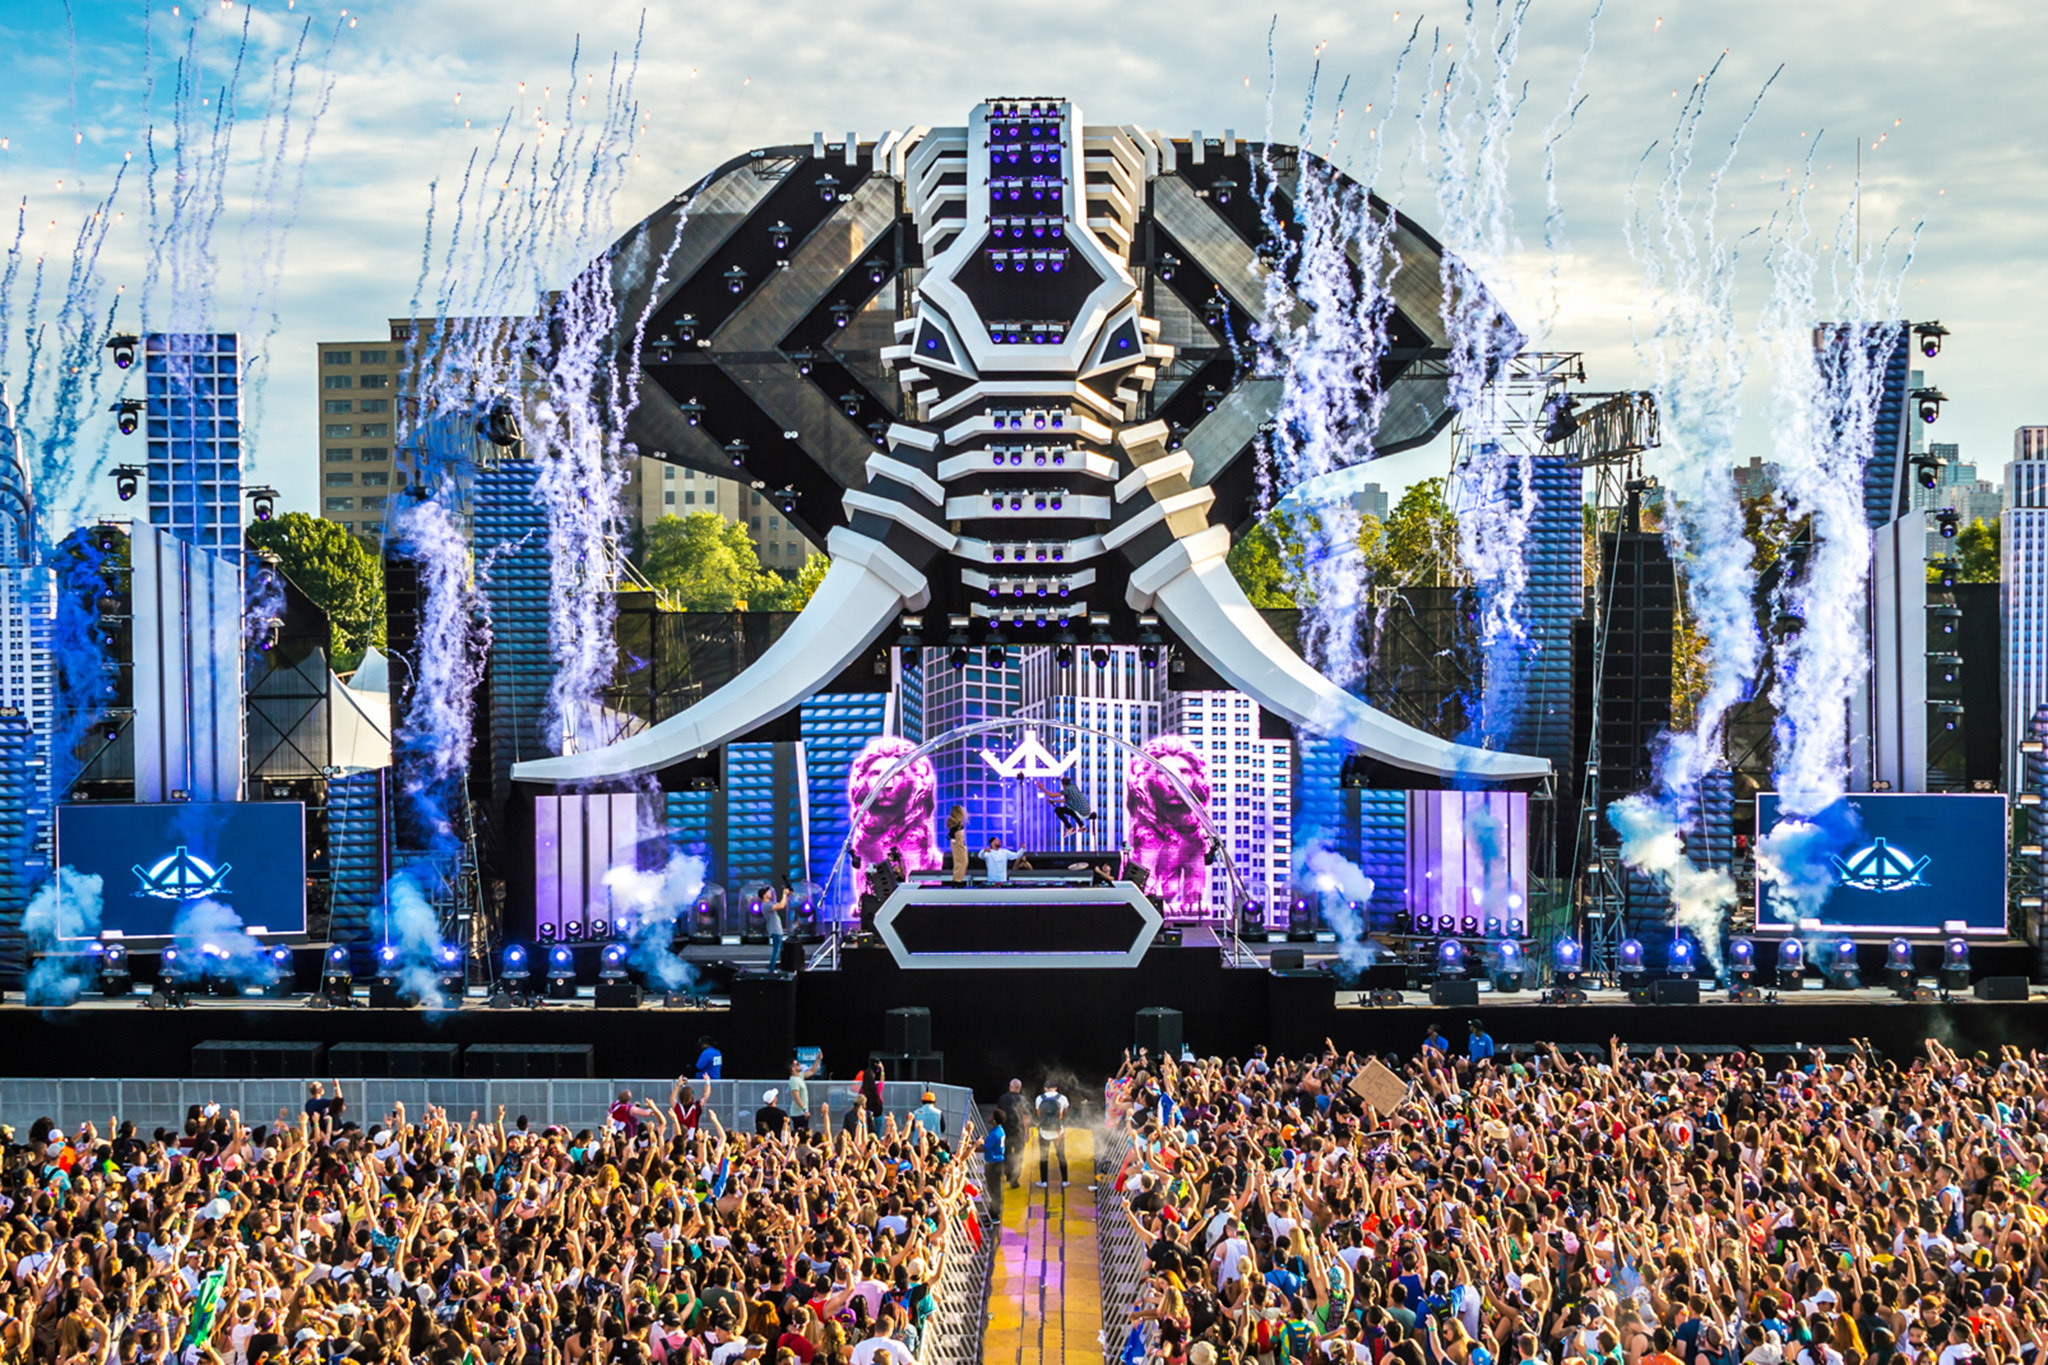 Electric zoo festival - Most Popular American Festivals of All Time